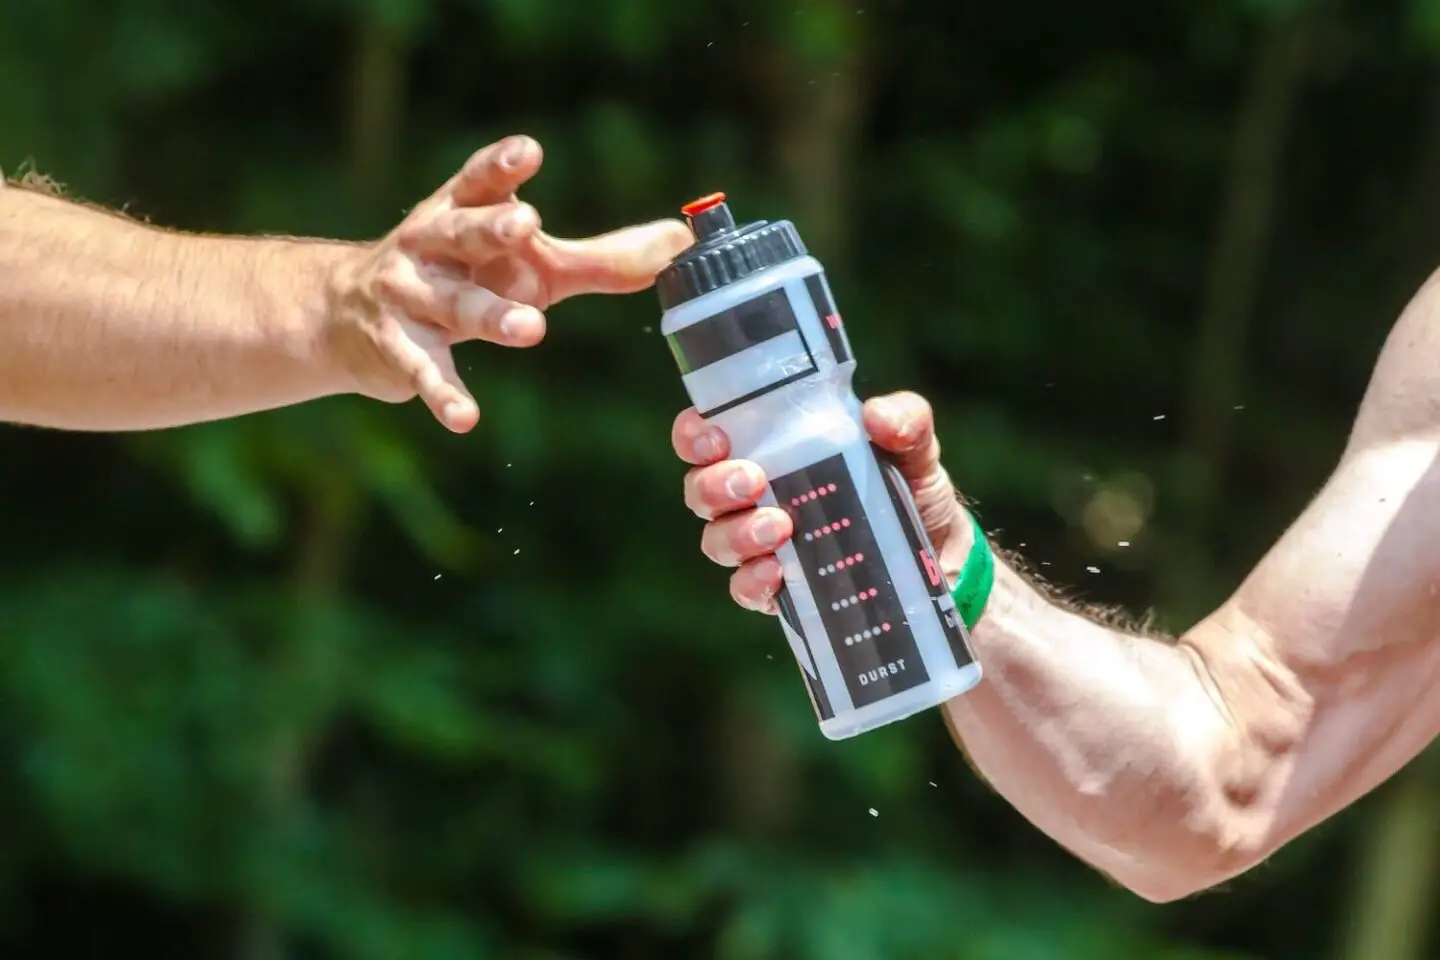 A mans arm holding out a water bottle. Another arm reaches out to take it.